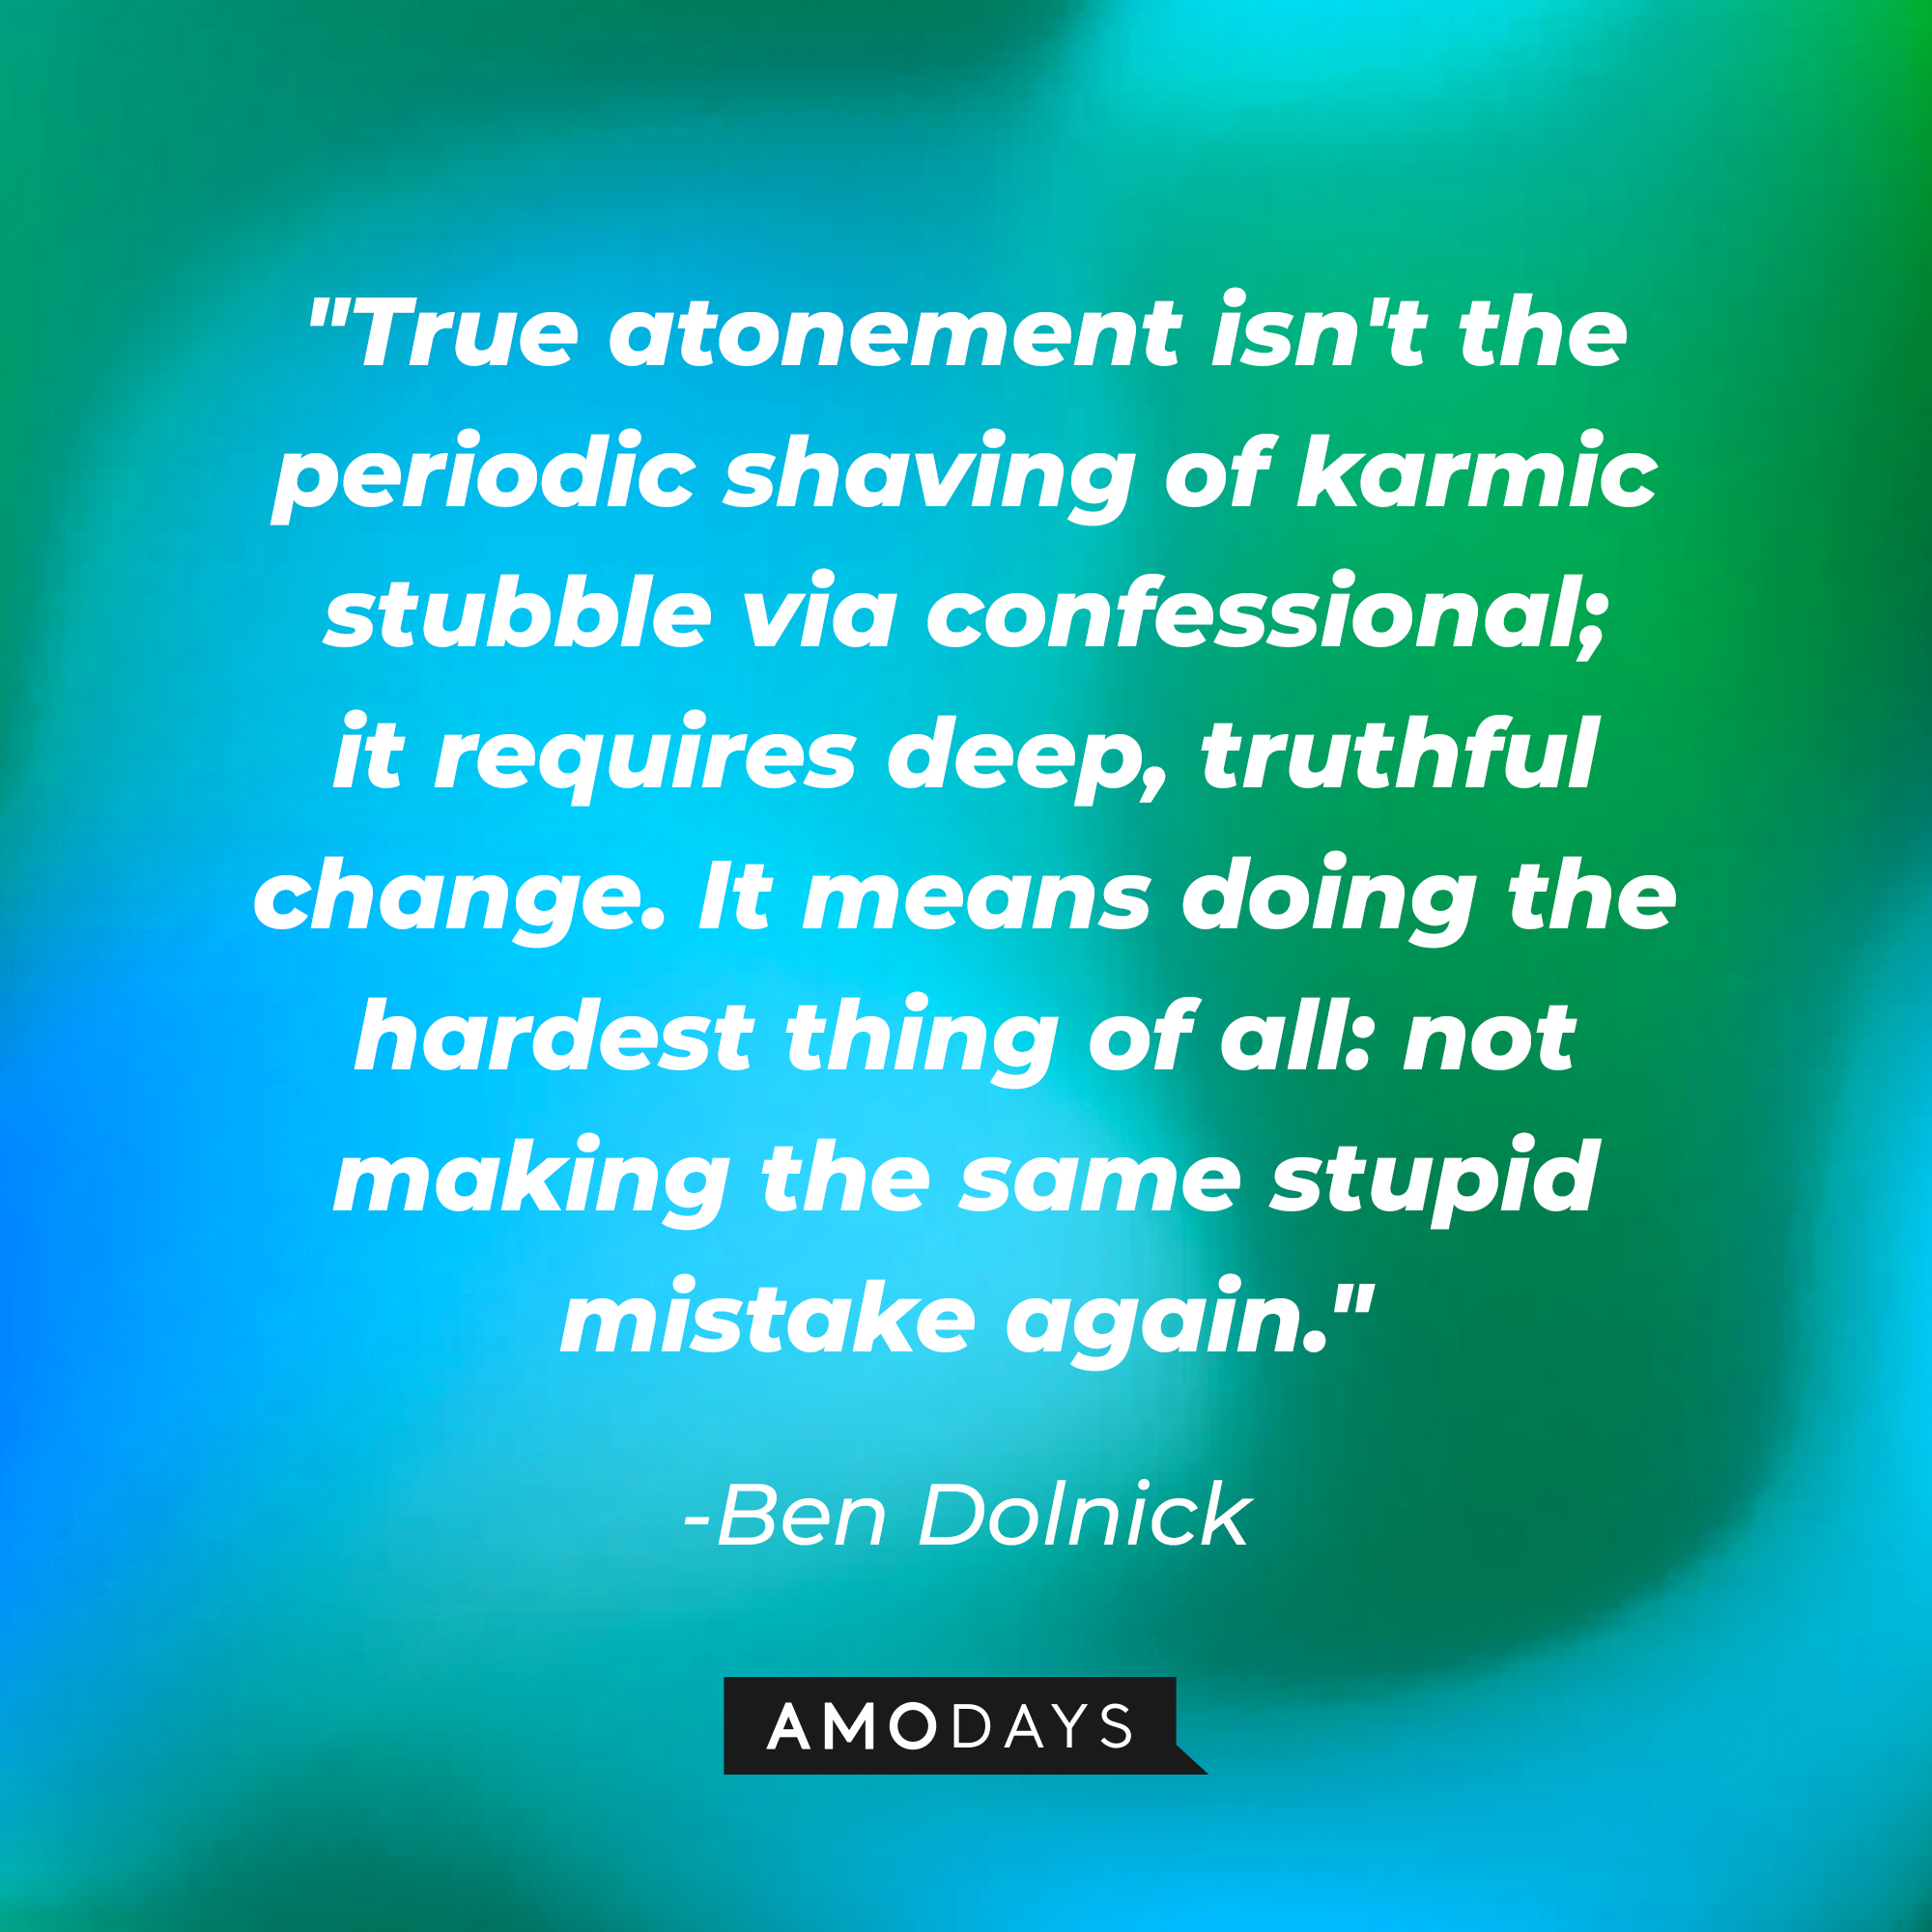 A photo with Ben Dolnick's quote, "True atonement isn't the periodic shaving of karmic stubble via confessional; it requires deep, truthful change. It means doing the hardest thing of all: not making the same stupid mistake again." | Source: Amodays